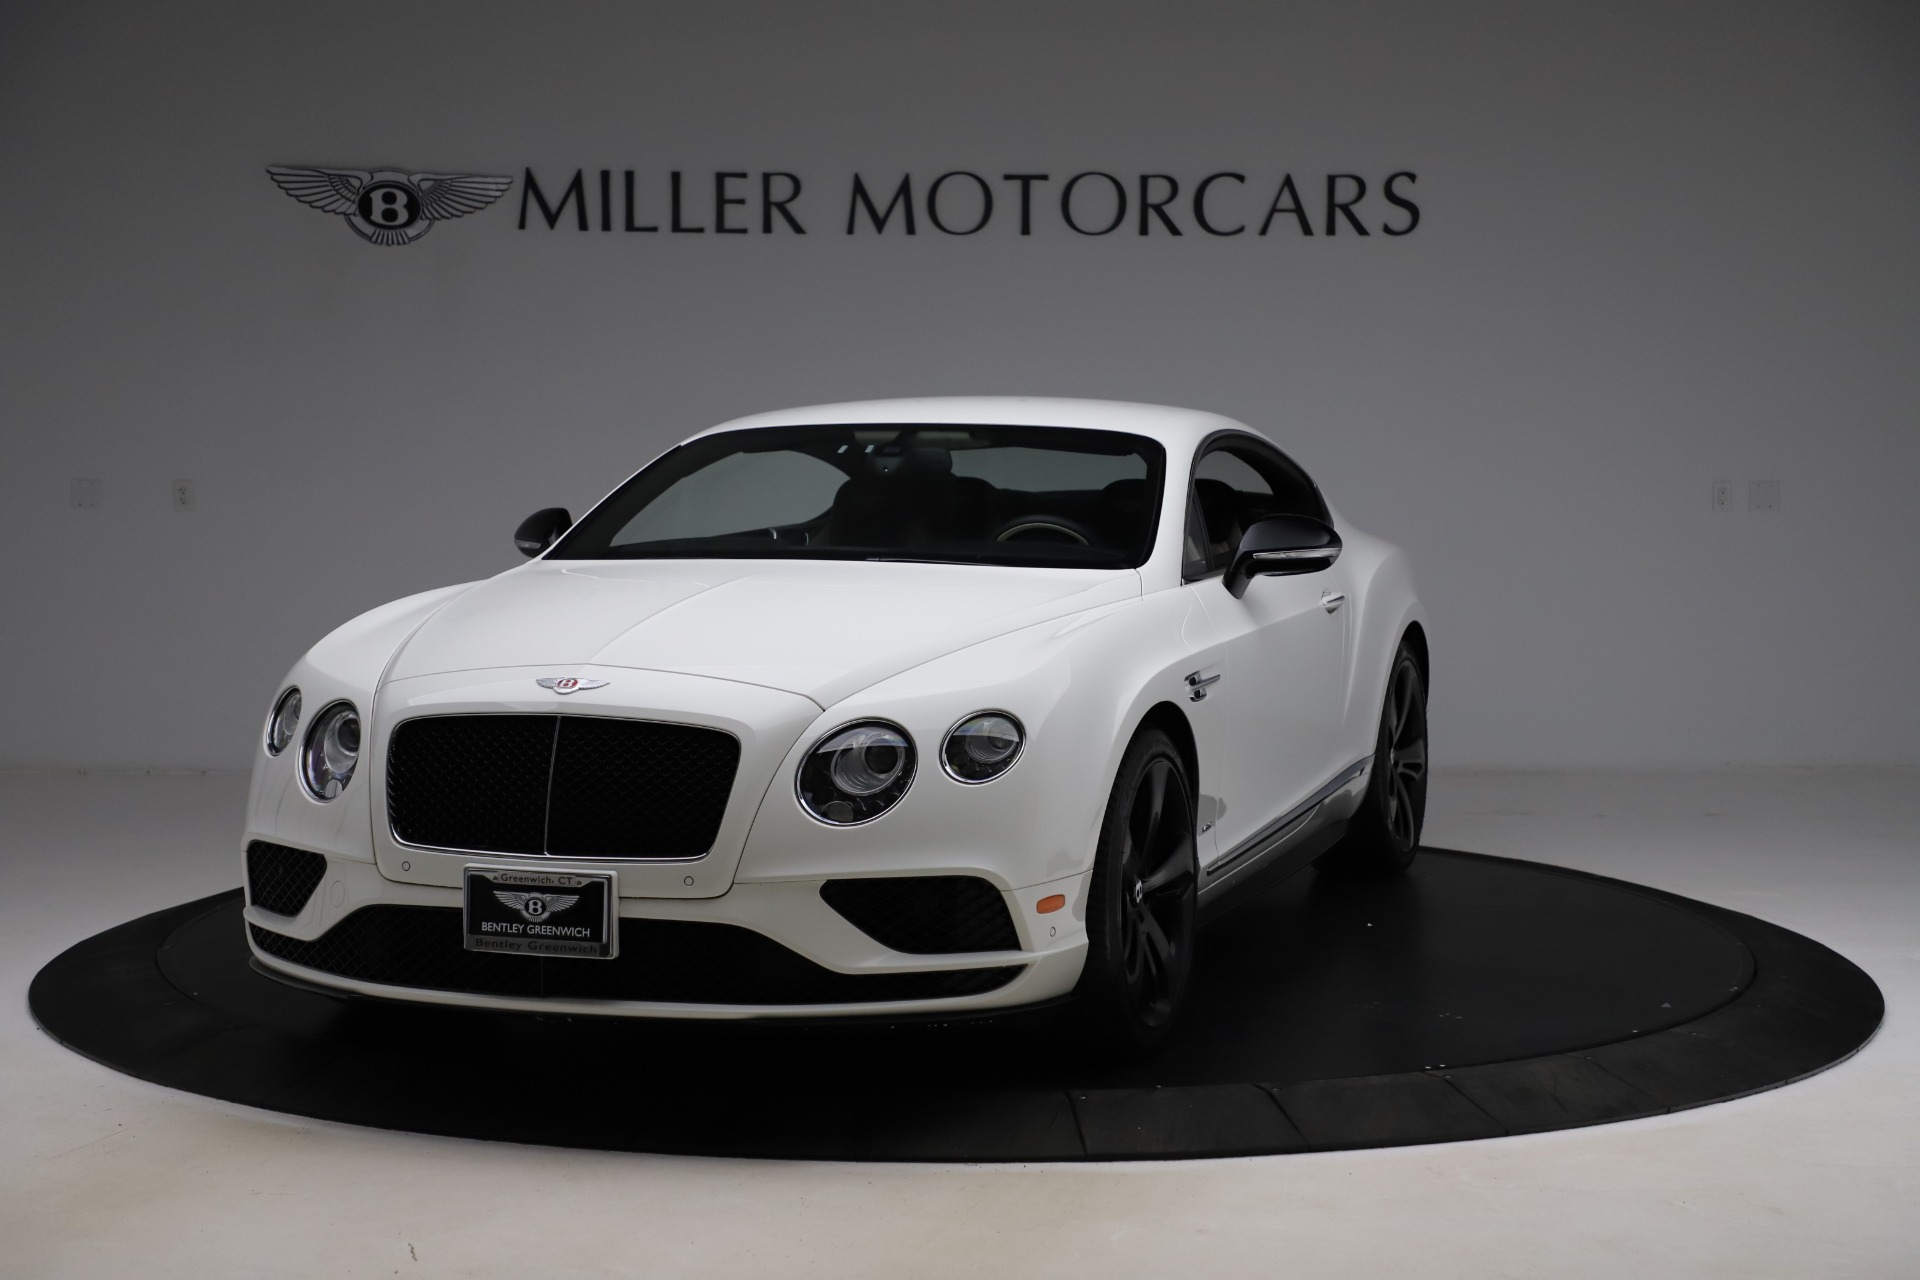 Used 2017 Bentley Continental GT V8 S for sale Sold at Bentley Greenwich in Greenwich CT 06830 1